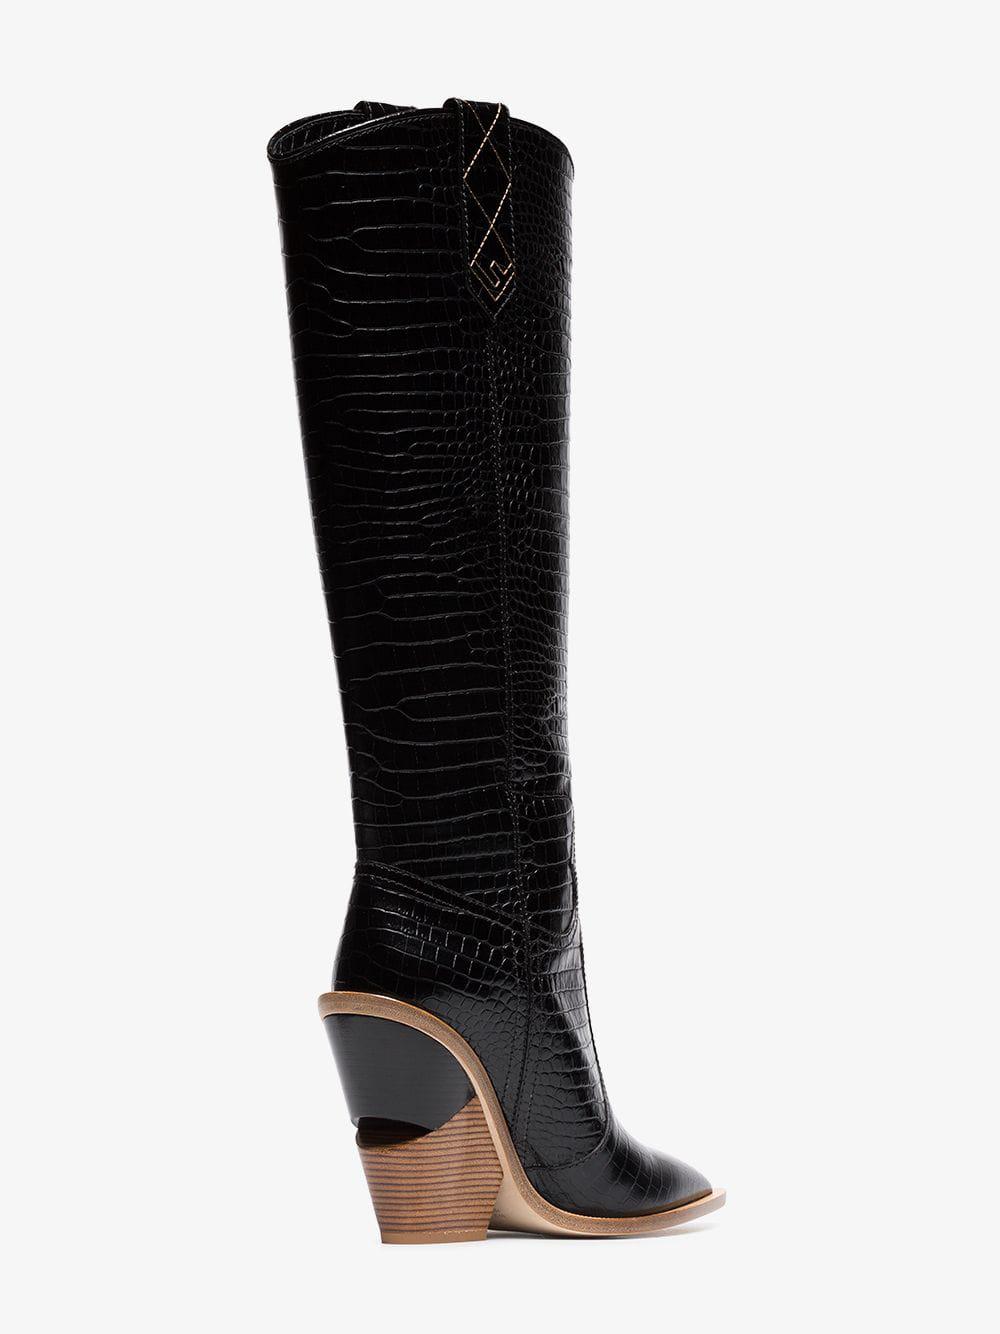 Fendi Fur Stamped-leather Cowboy Boots 